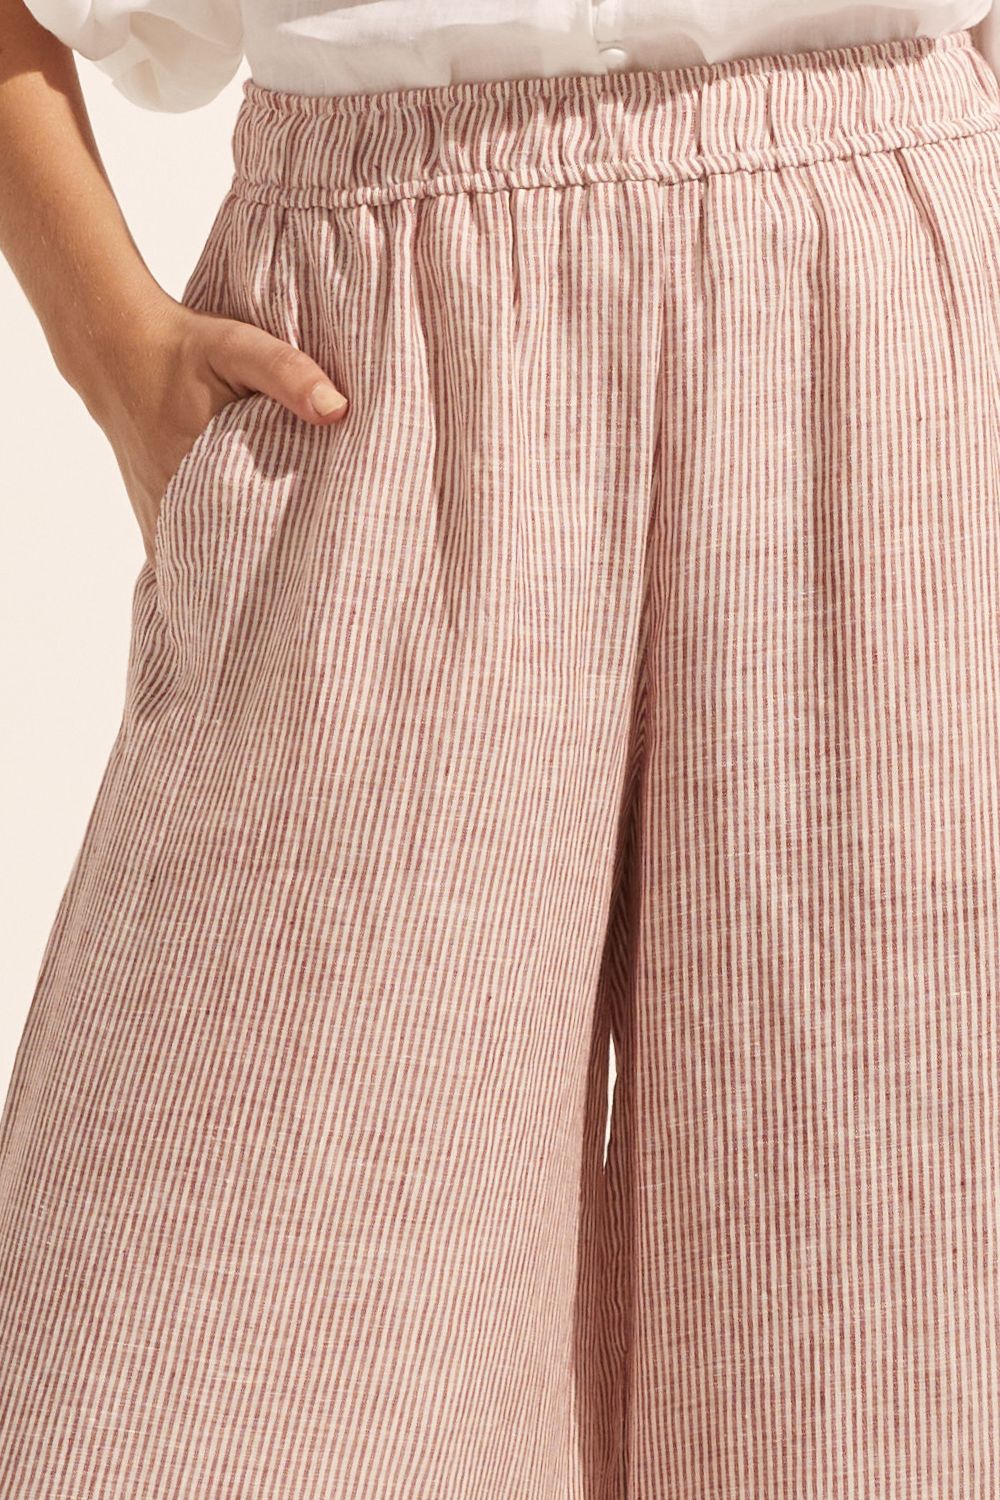 ginger and white stripe, pants, elasticated waist, side pockets, wide leg, close up image